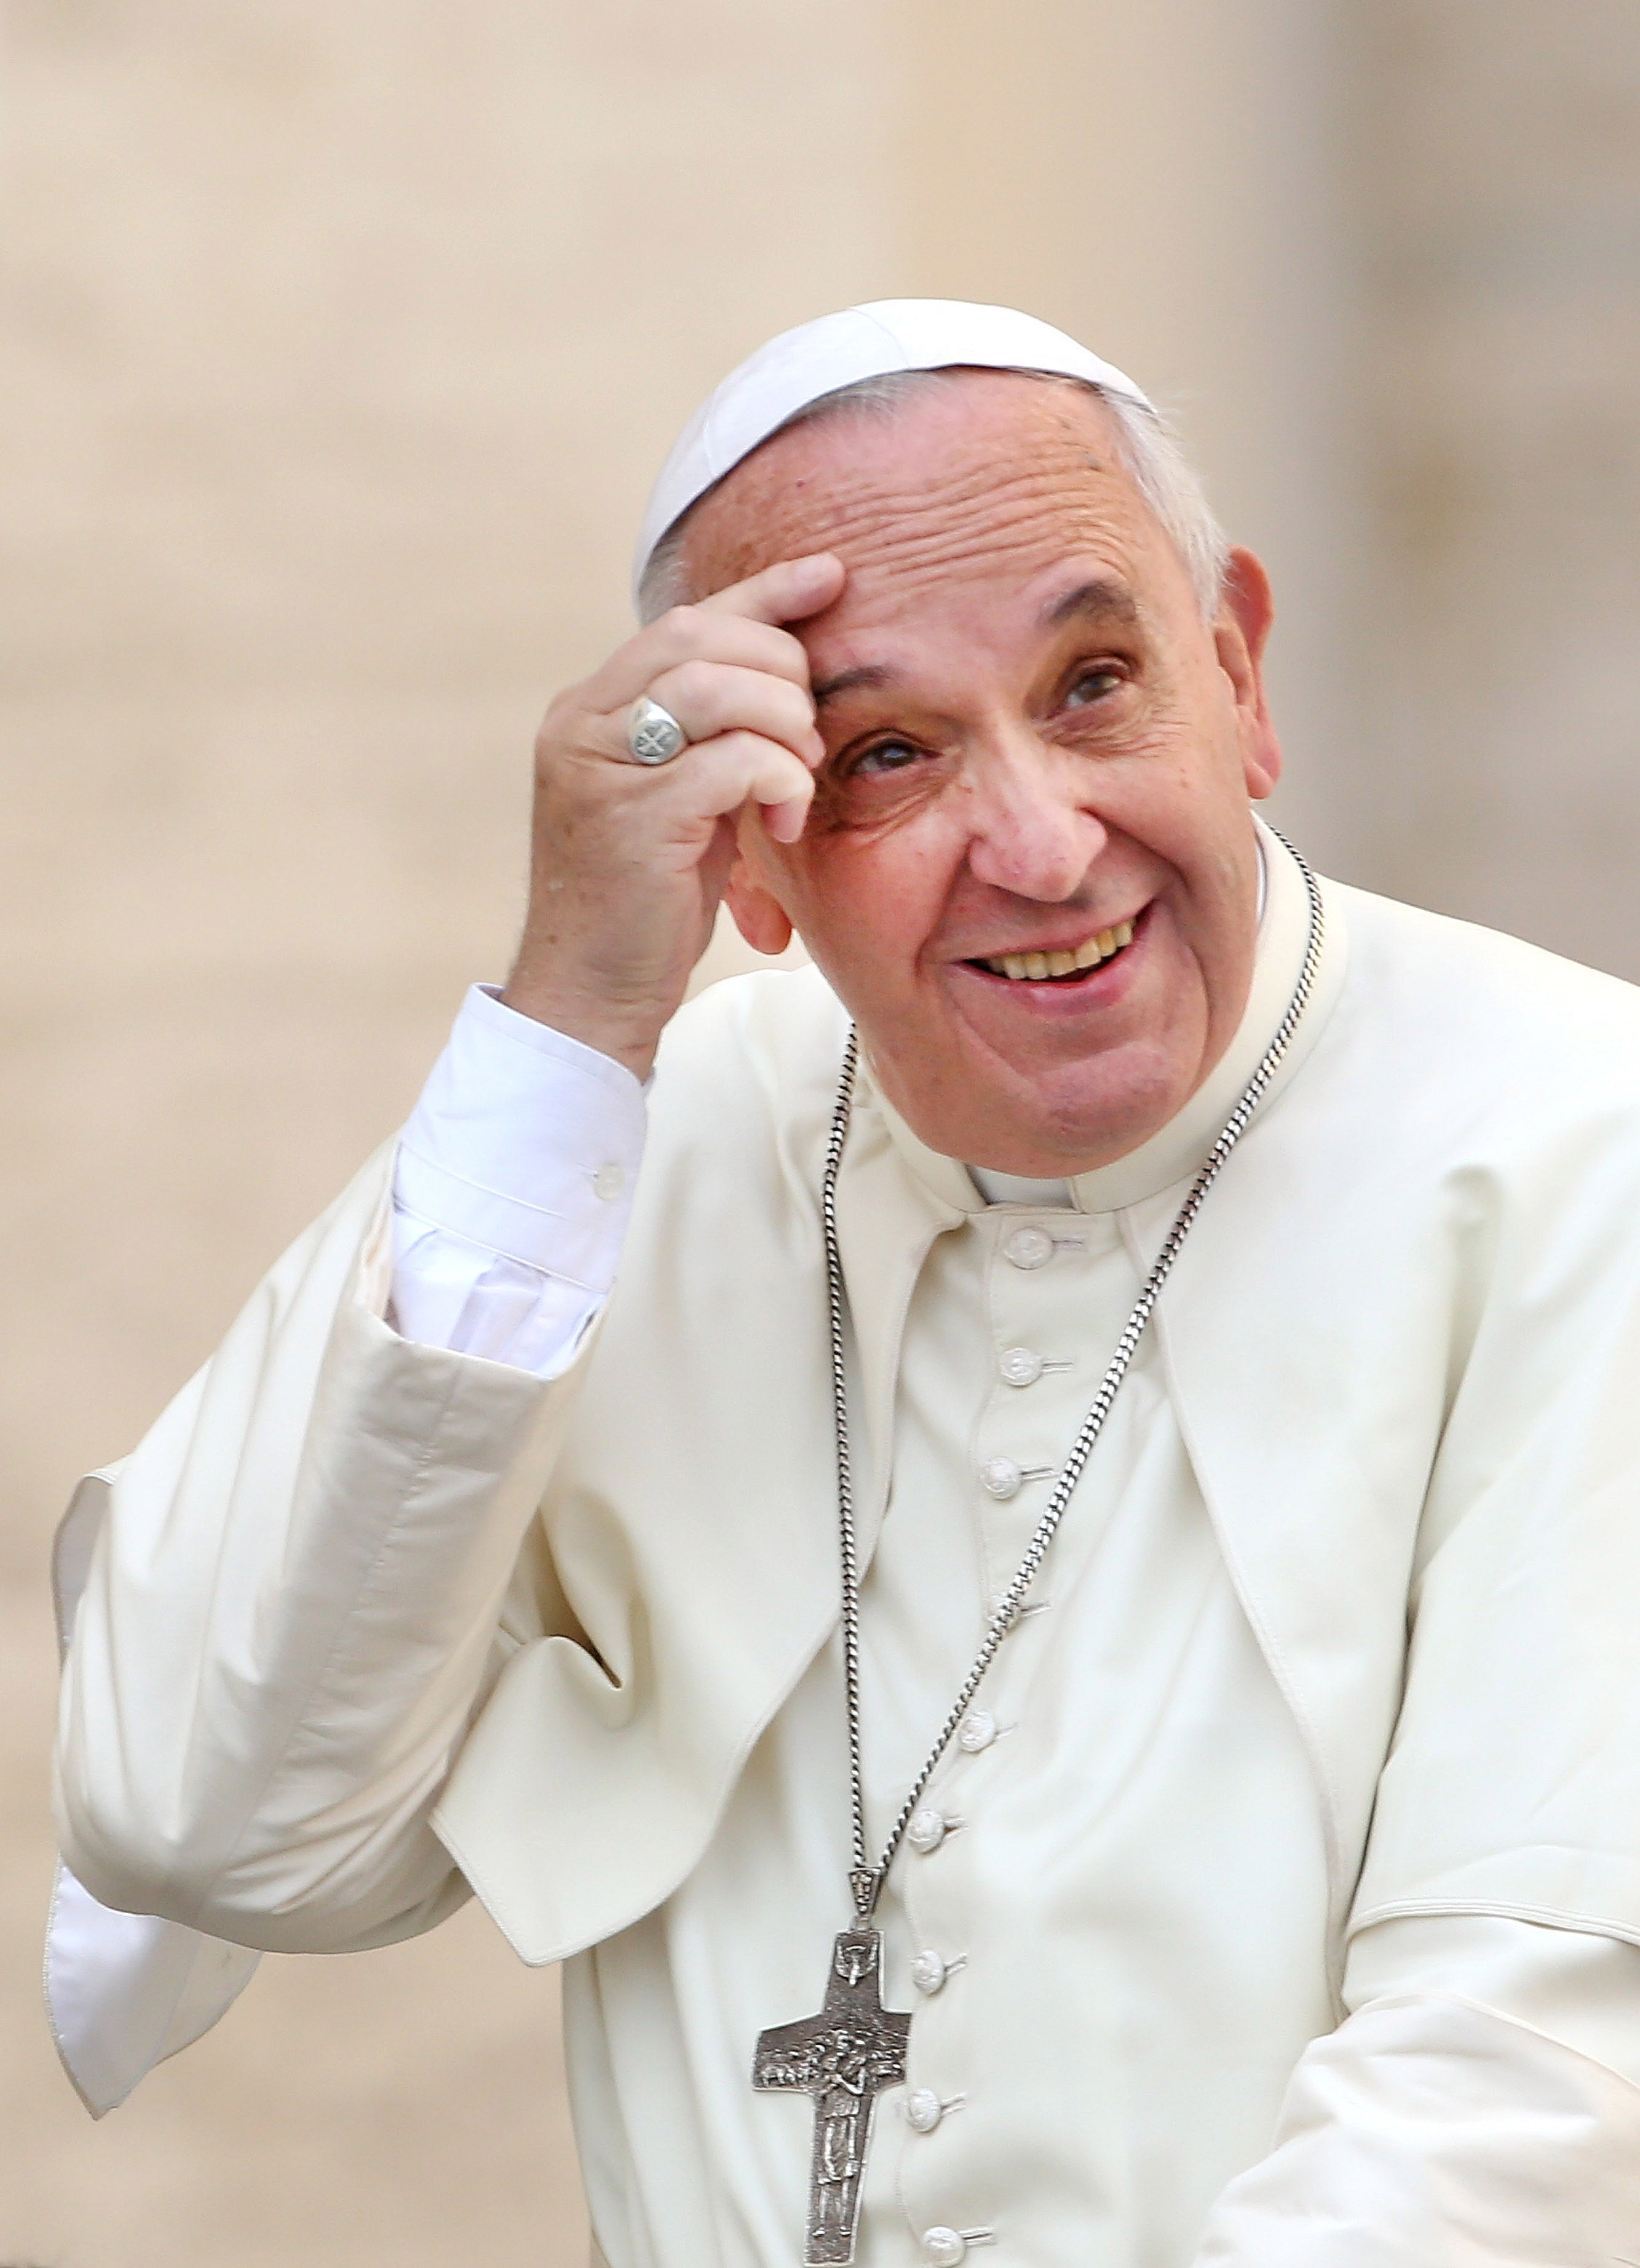 The Pope found himself at the centre of a raging climate change debate